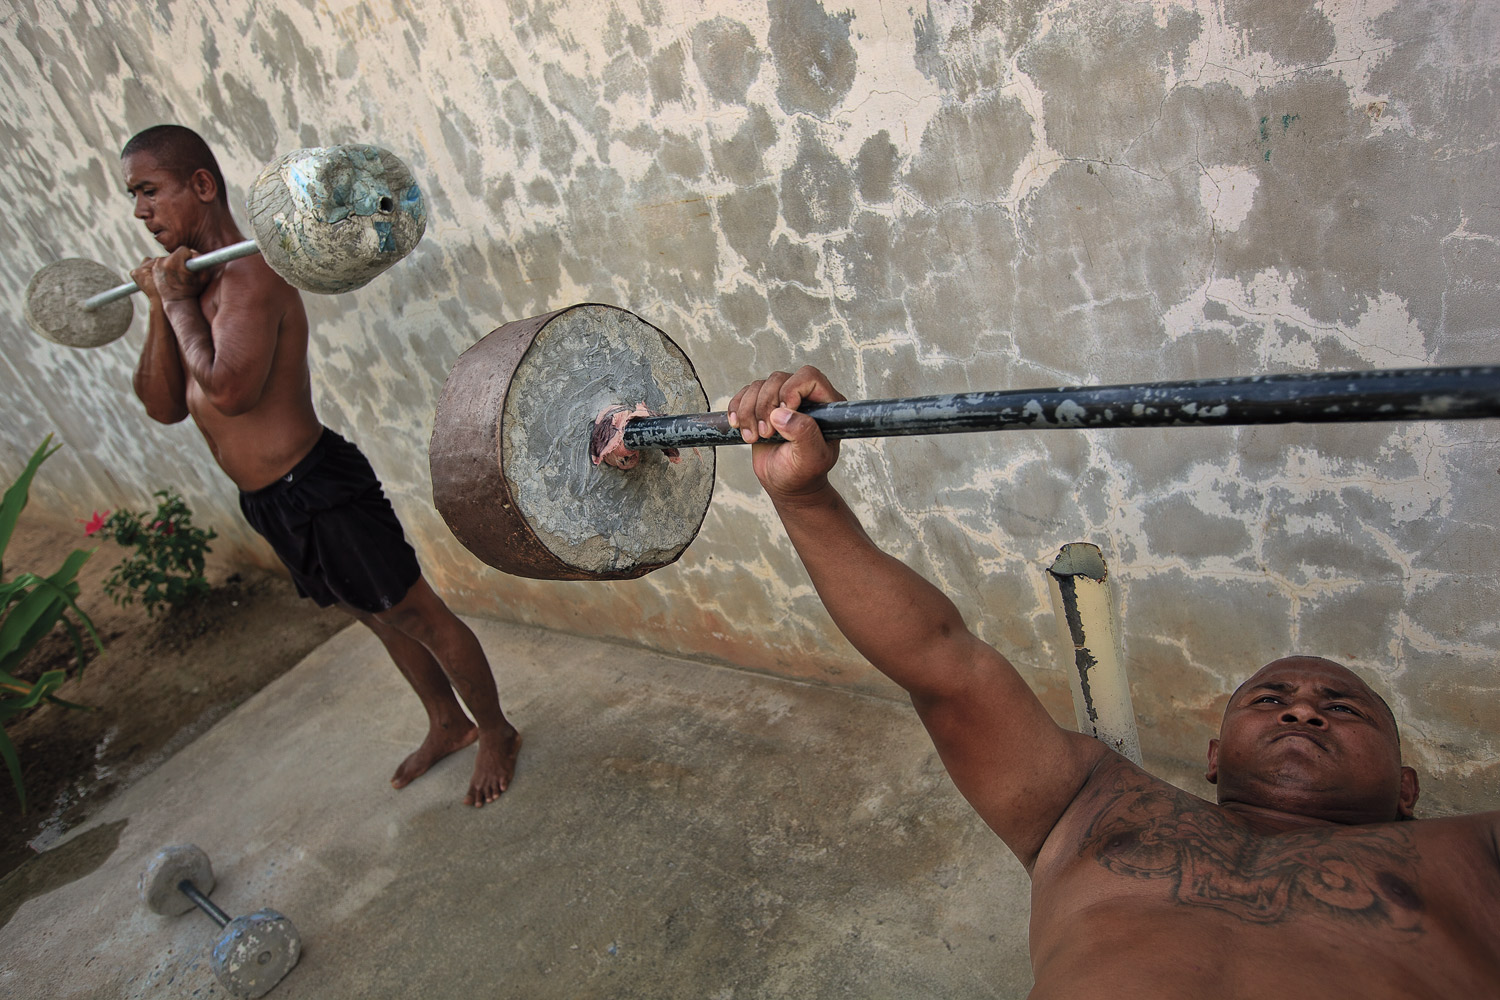 Inmates lift weights within the prison walls.